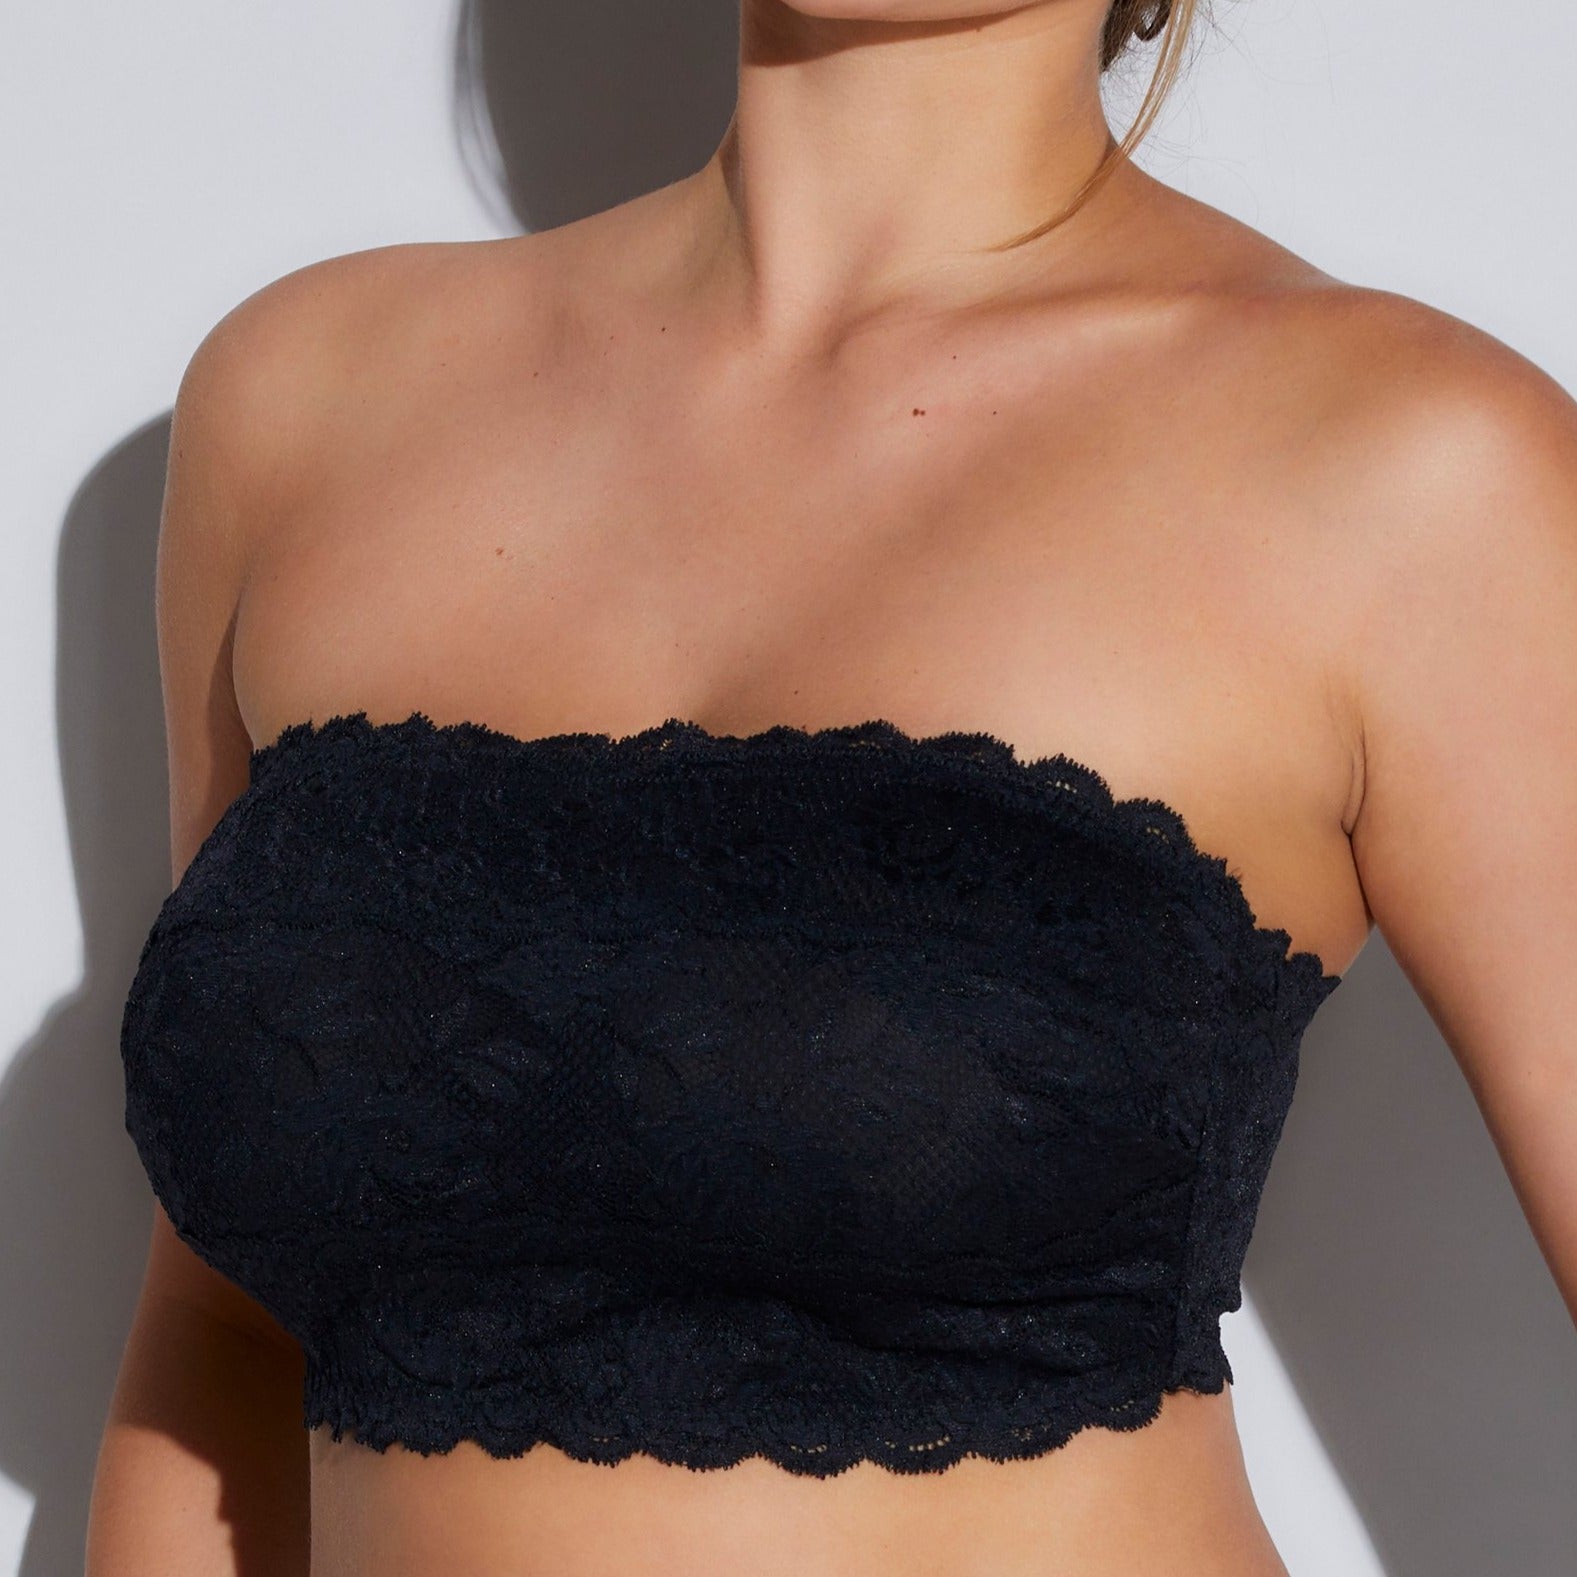 Free People Scalloped Lace Bandeau Black SM (Women's 4-6) at